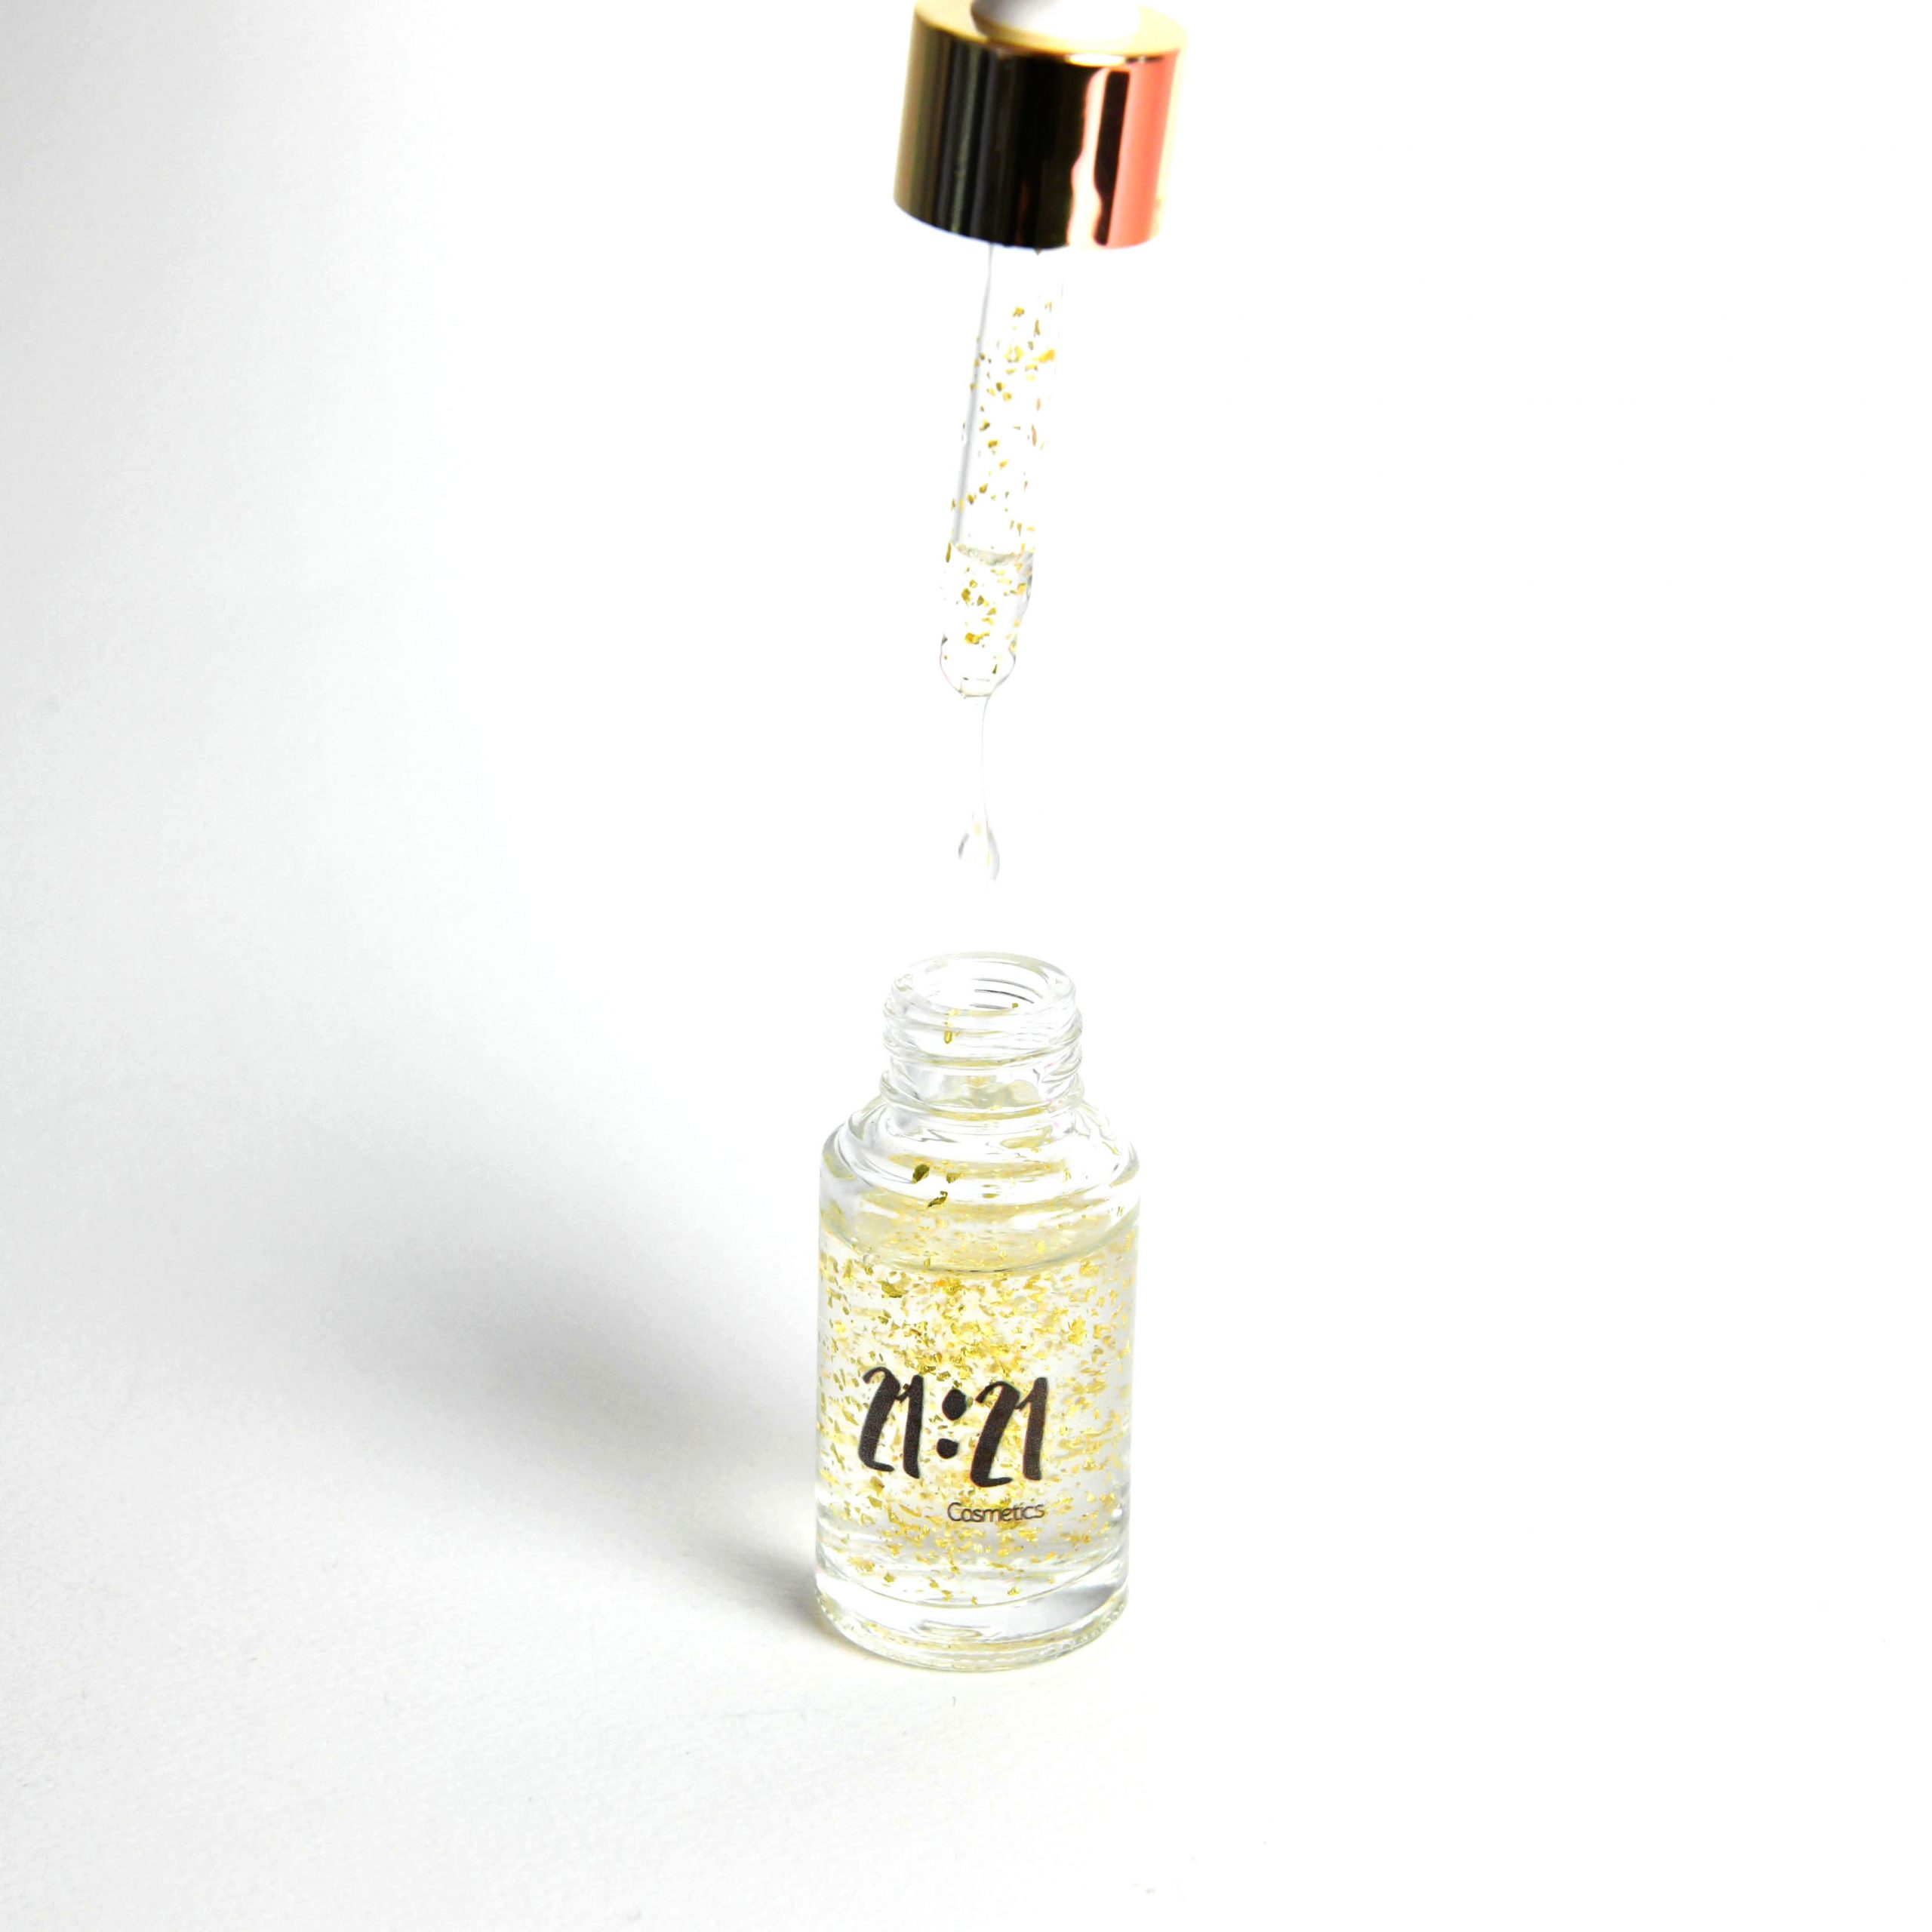 Base Primer Oil with Gold Flakes - 21:21 Cosmetics